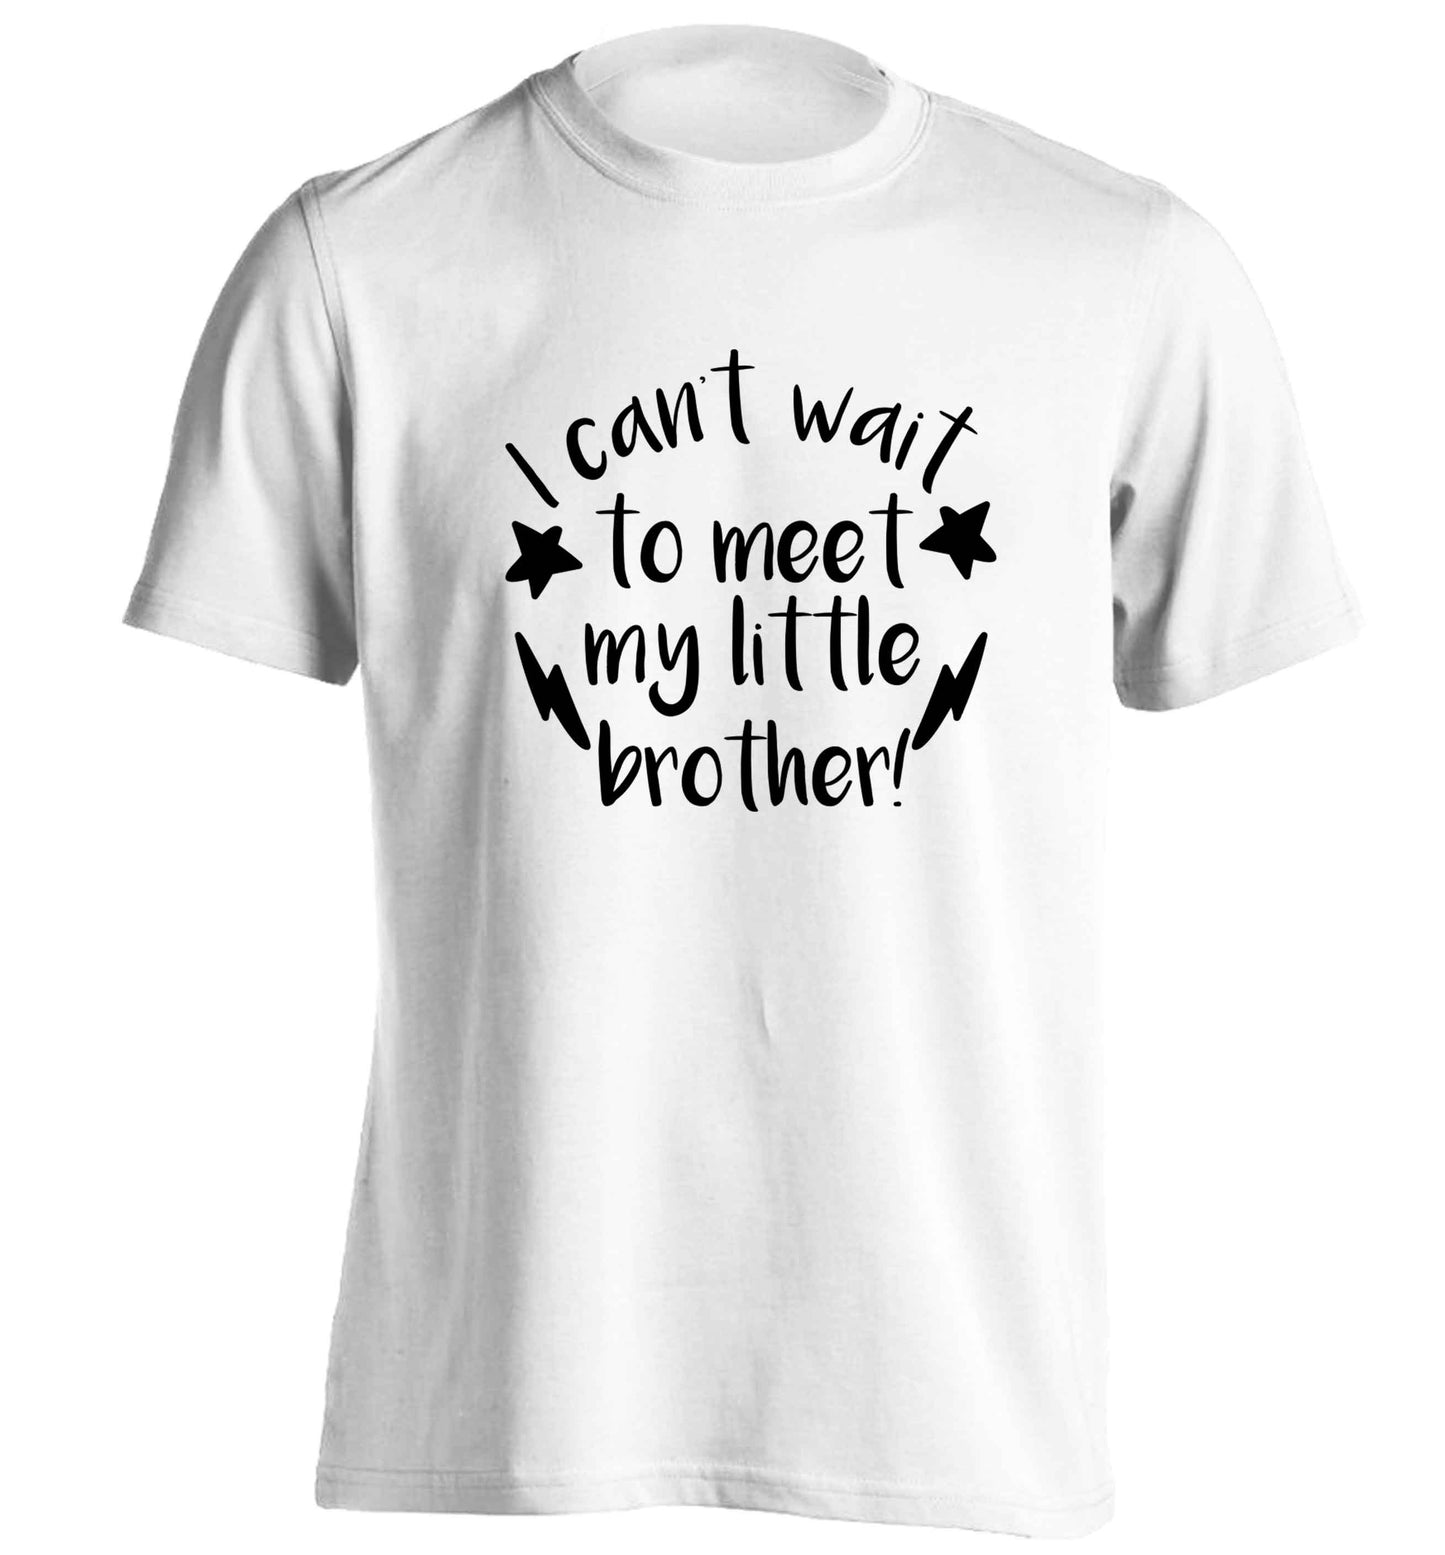 I can't wait to meet my sister! adults unisex white Tshirt 2XL